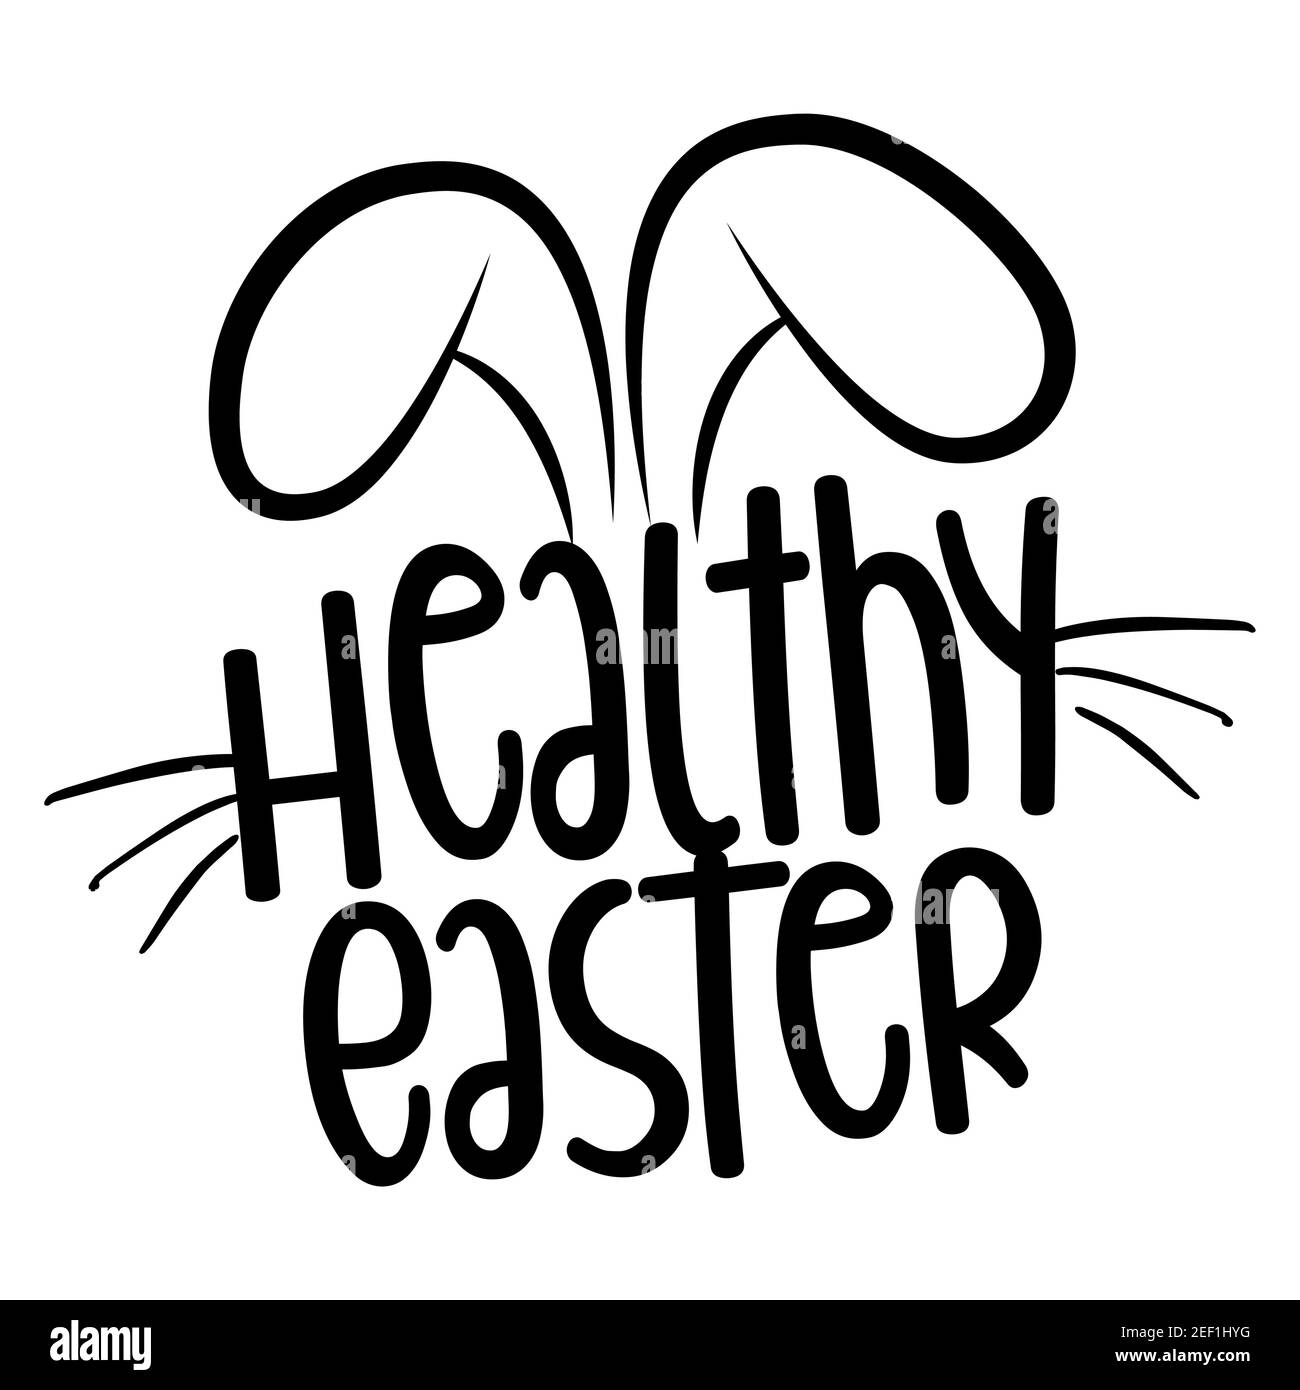 Healthy Easter - Lettering poster with text for self quarantine Easter. Cute hand drawn rabbit for easter egg hunt. 2021 Easter cancelled. Stock Vector